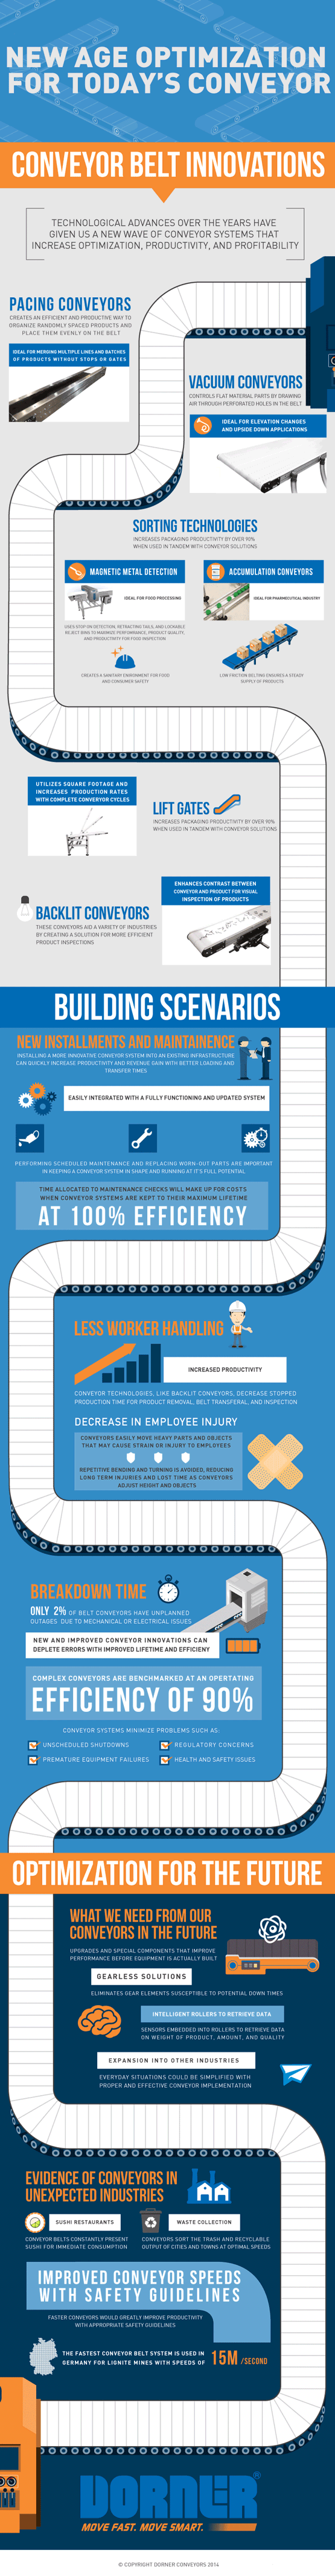 Optimization For Today's Conveyor Infographic